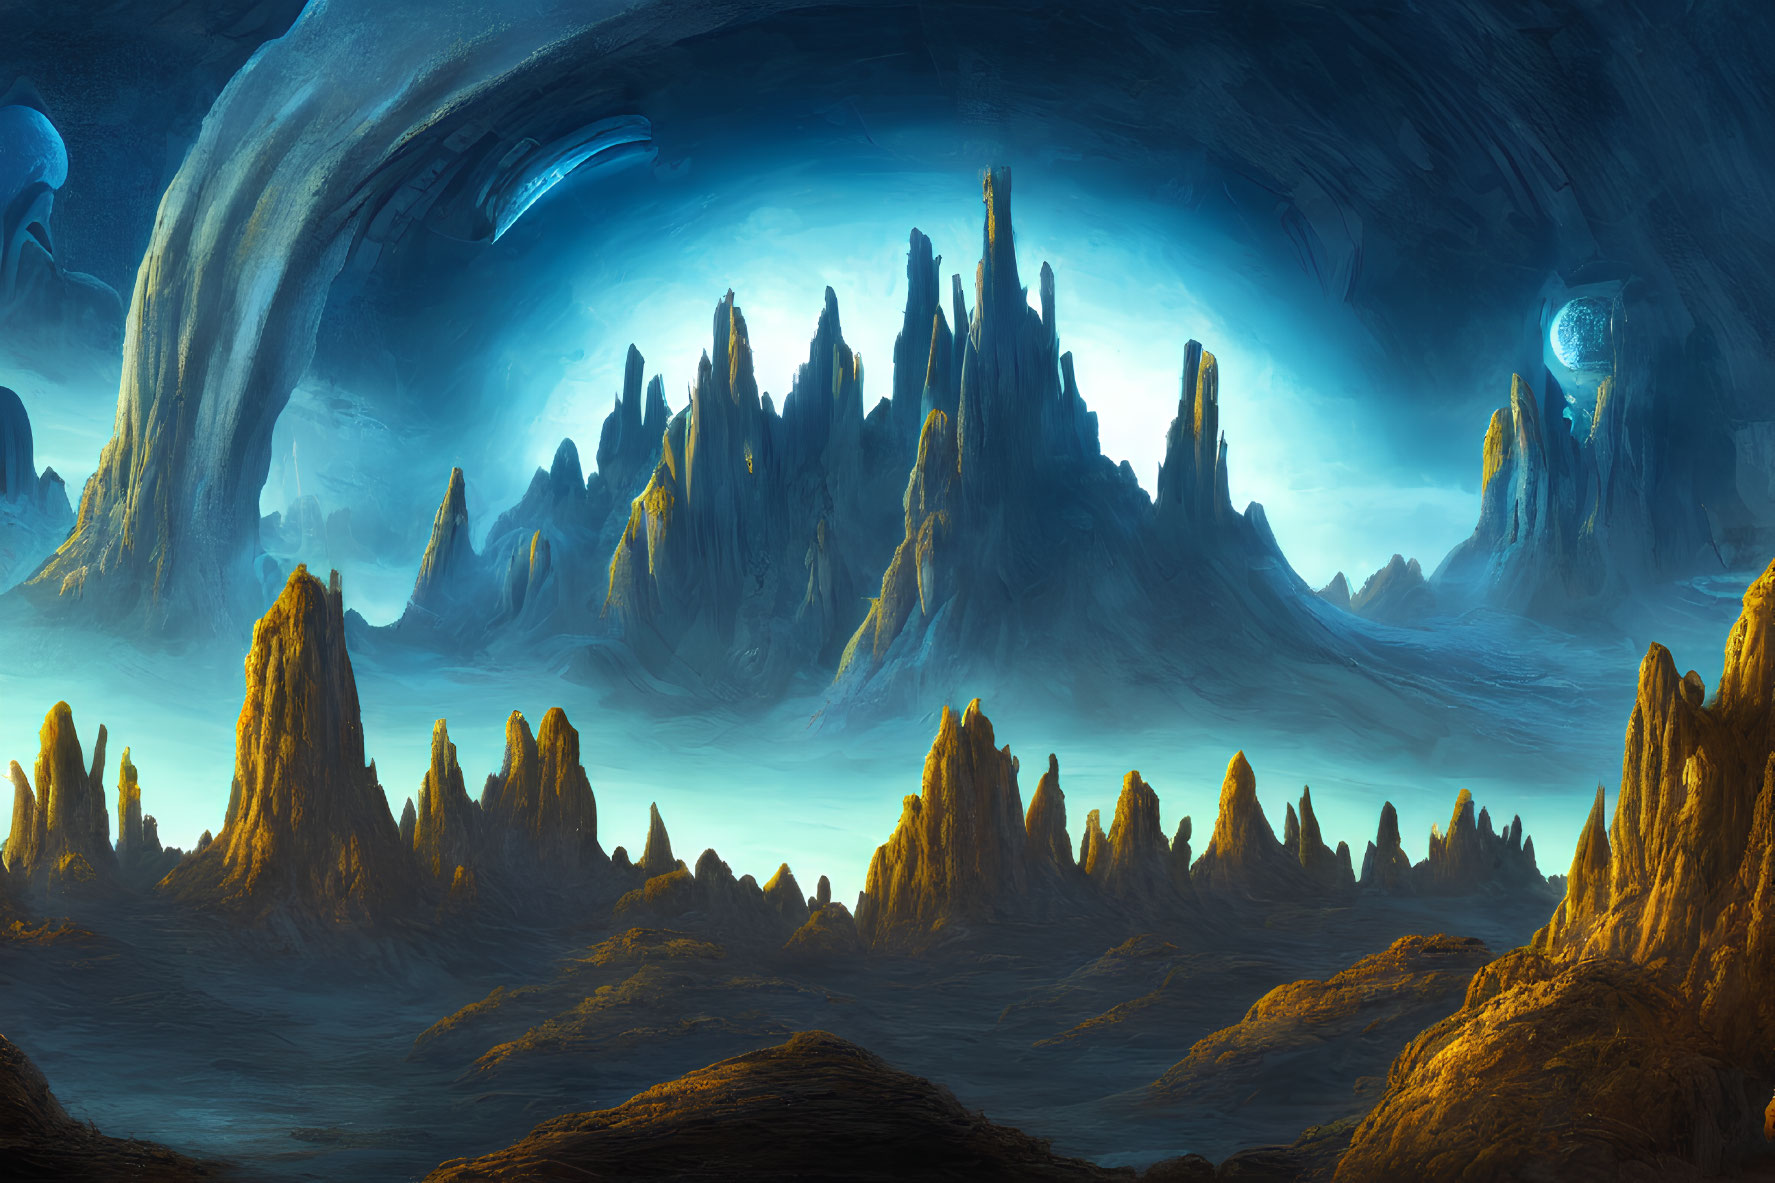 Alien landscape with towering rock formations and two moons